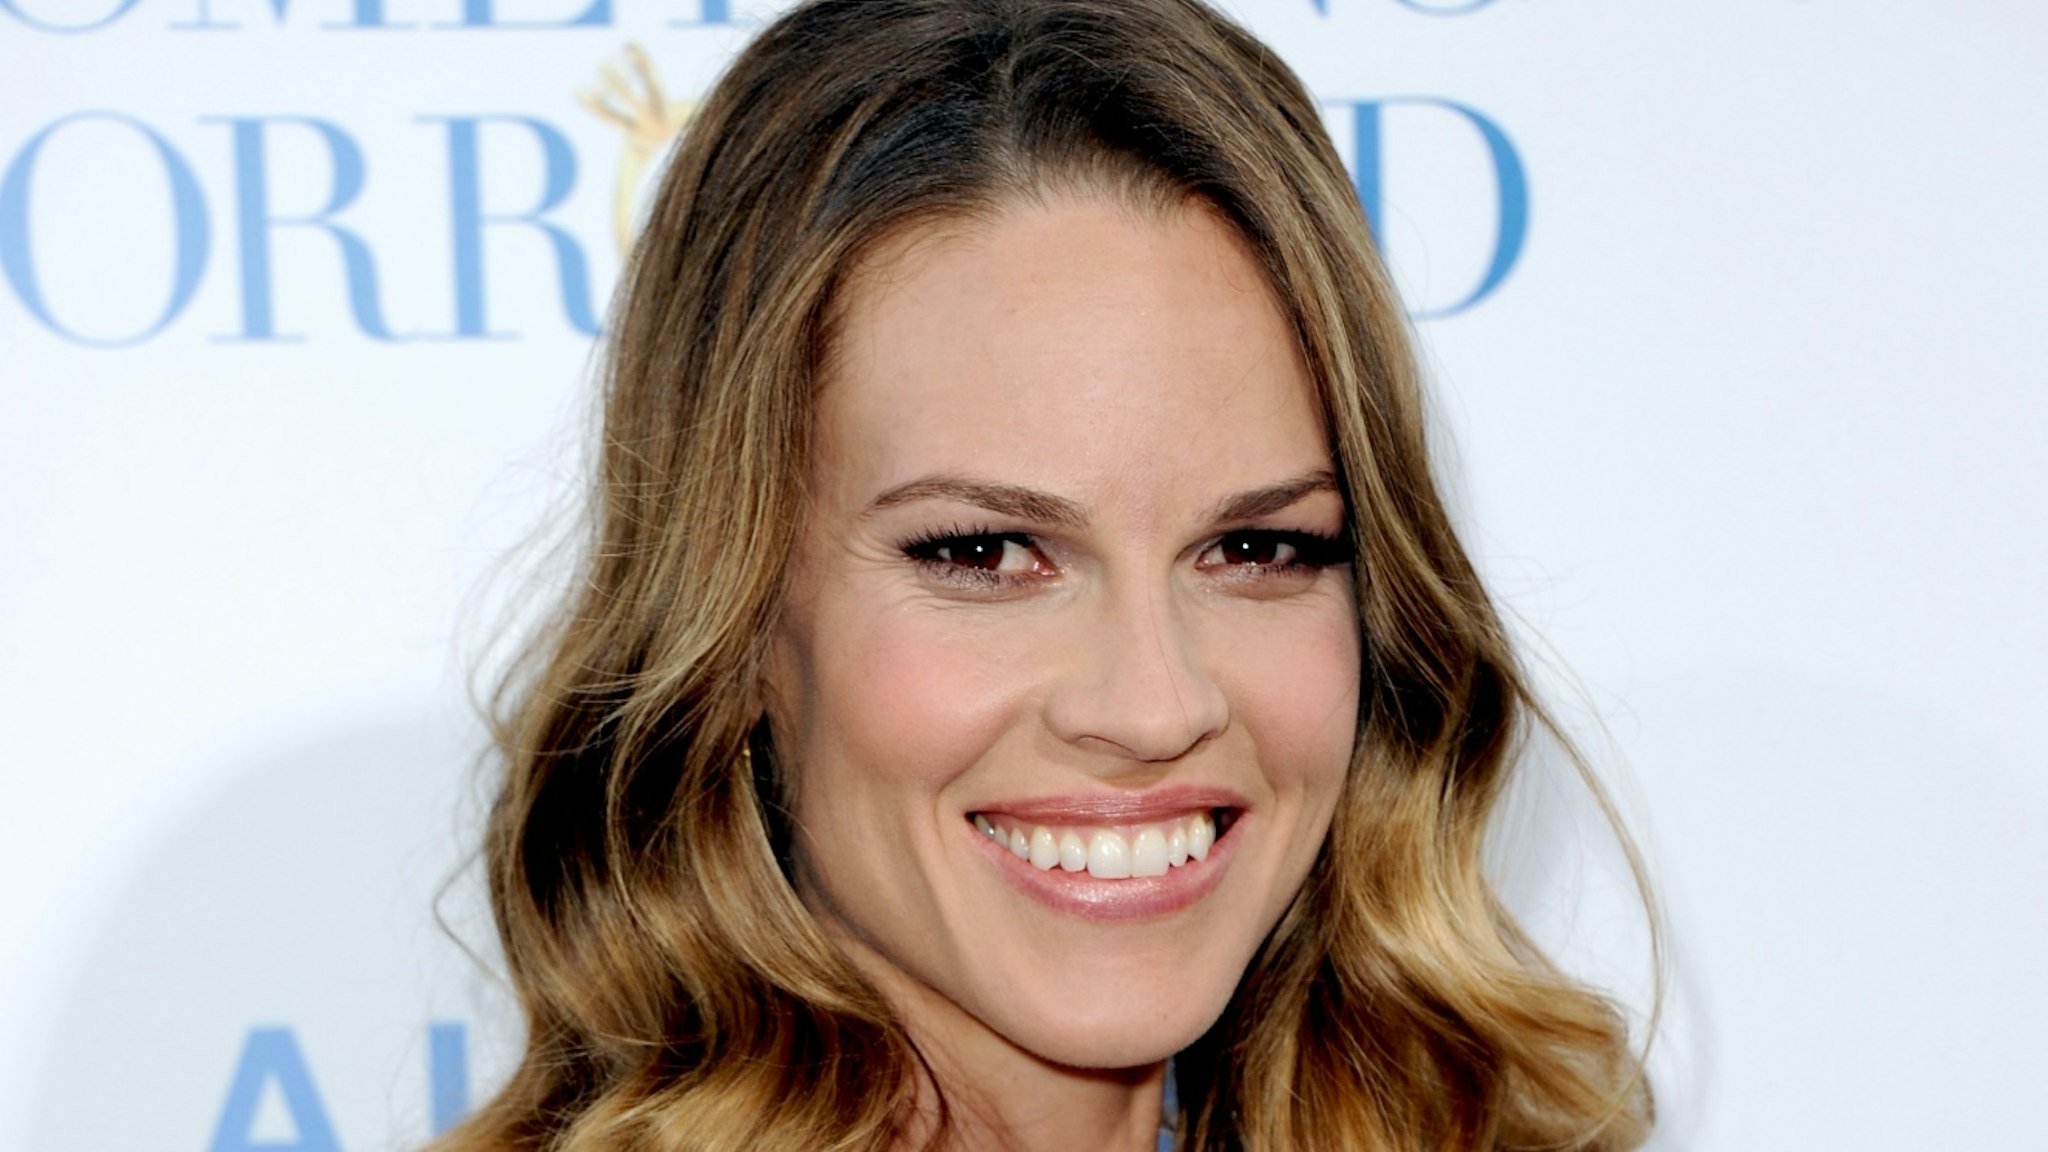 Producer/actress Hilary Swank arrives at the premiere of Warner Bros. "Something Borrowed" held at Grauman's Chinese Theatre on May 3, 2011 in Hollywood, California.